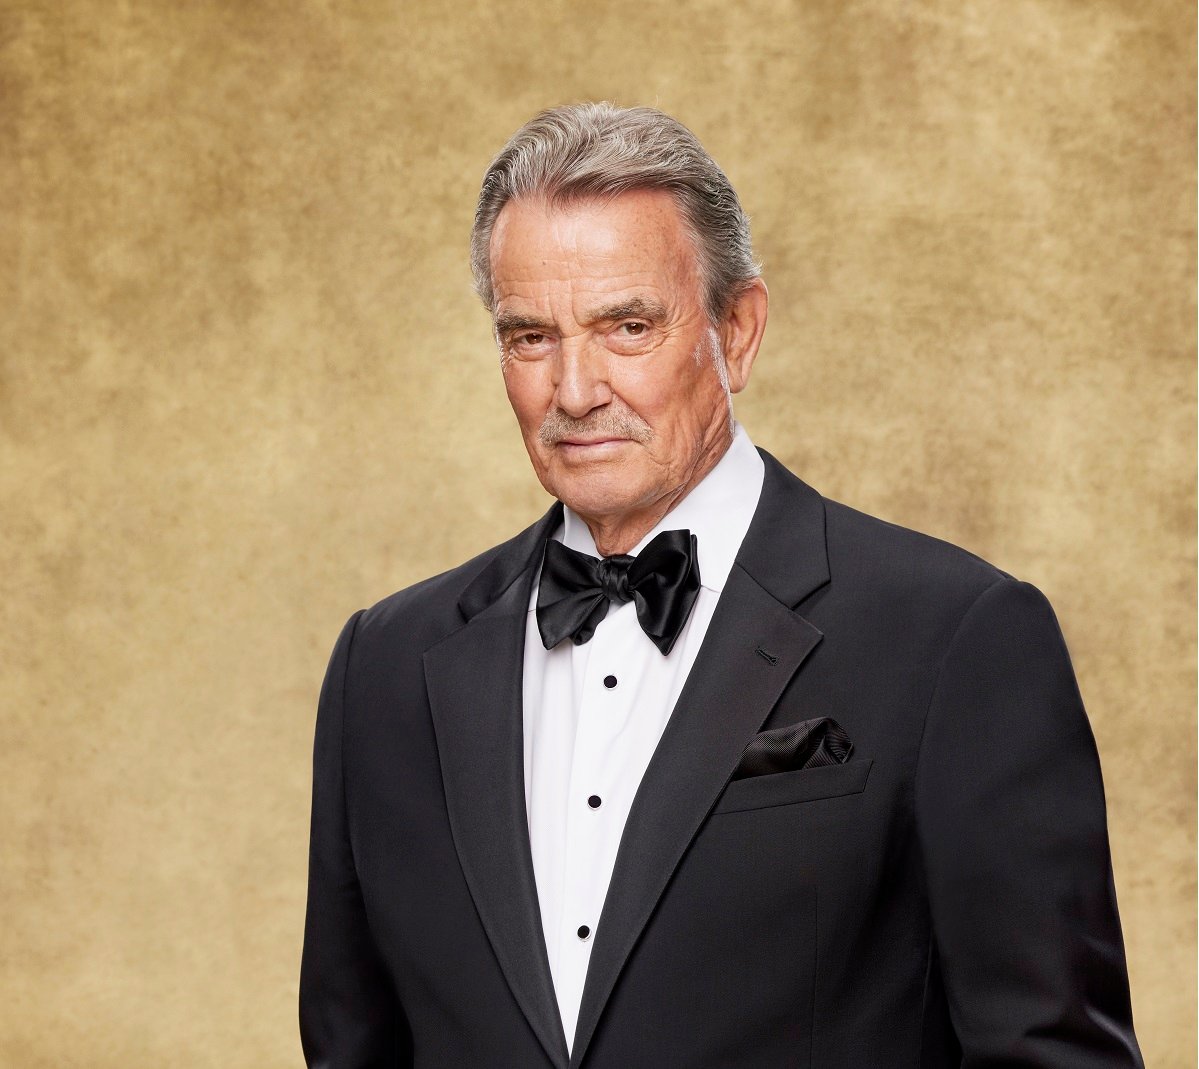 'The Young and the Restless' star Eric Braeden dressed in a tuxedo and posing in front of a gold backdrop.